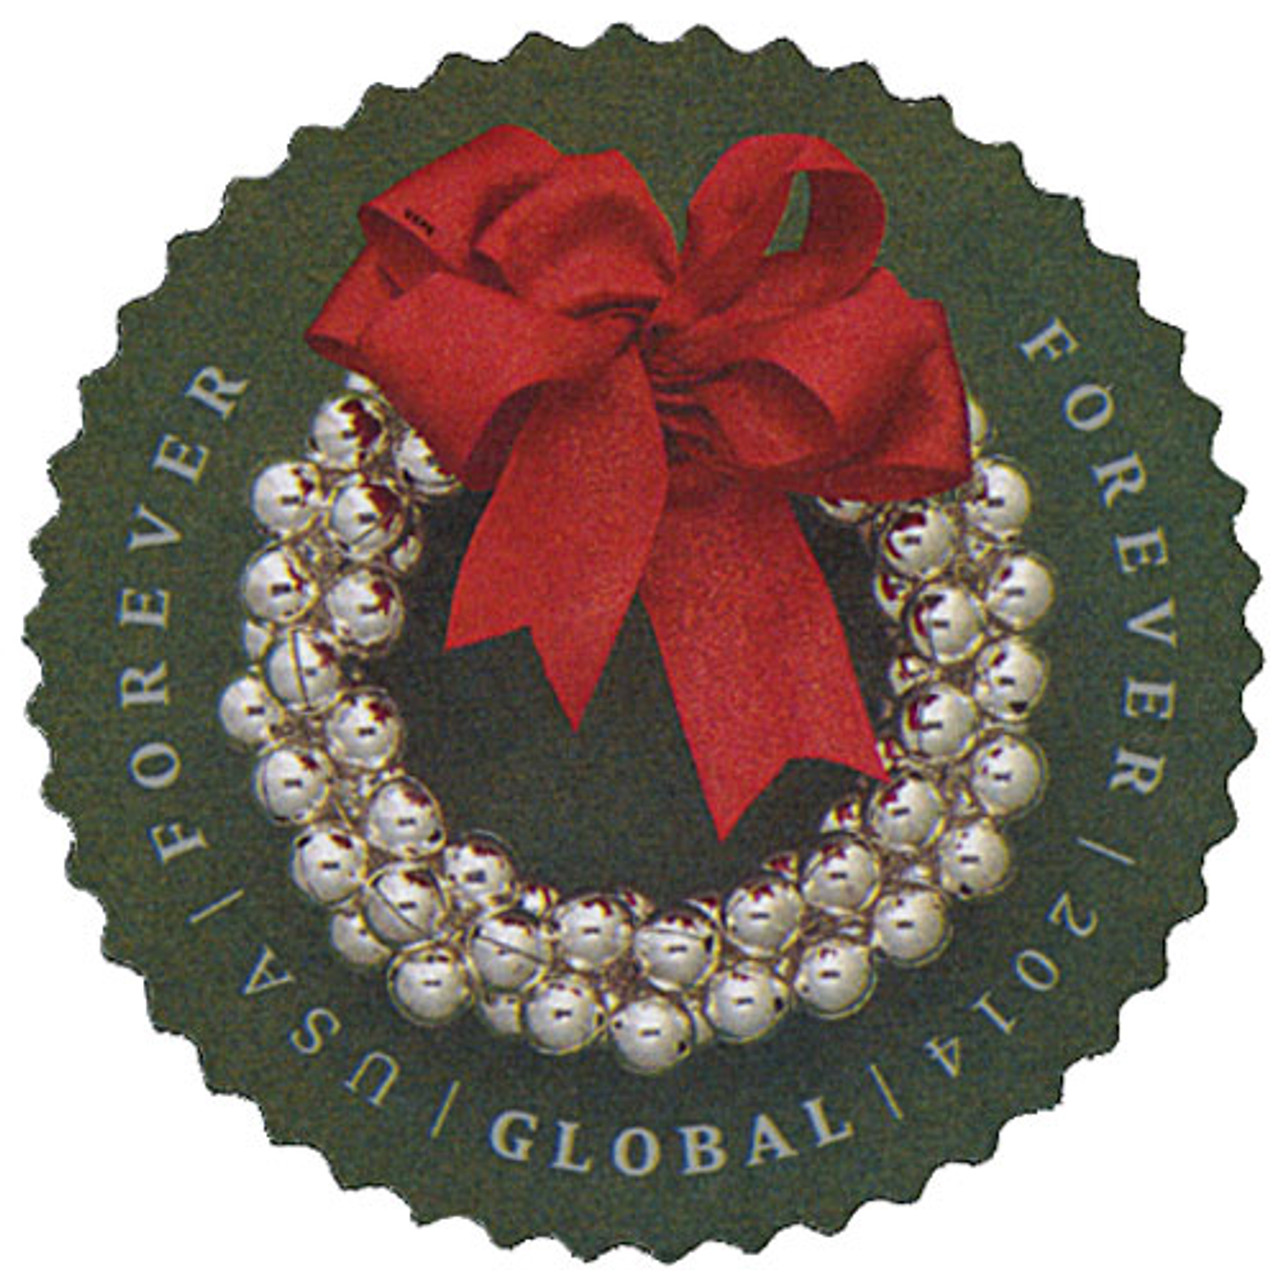 4936 - 2014 Global Forever Stamp - Silver Bells Wreath - Mystic Stamp  Company